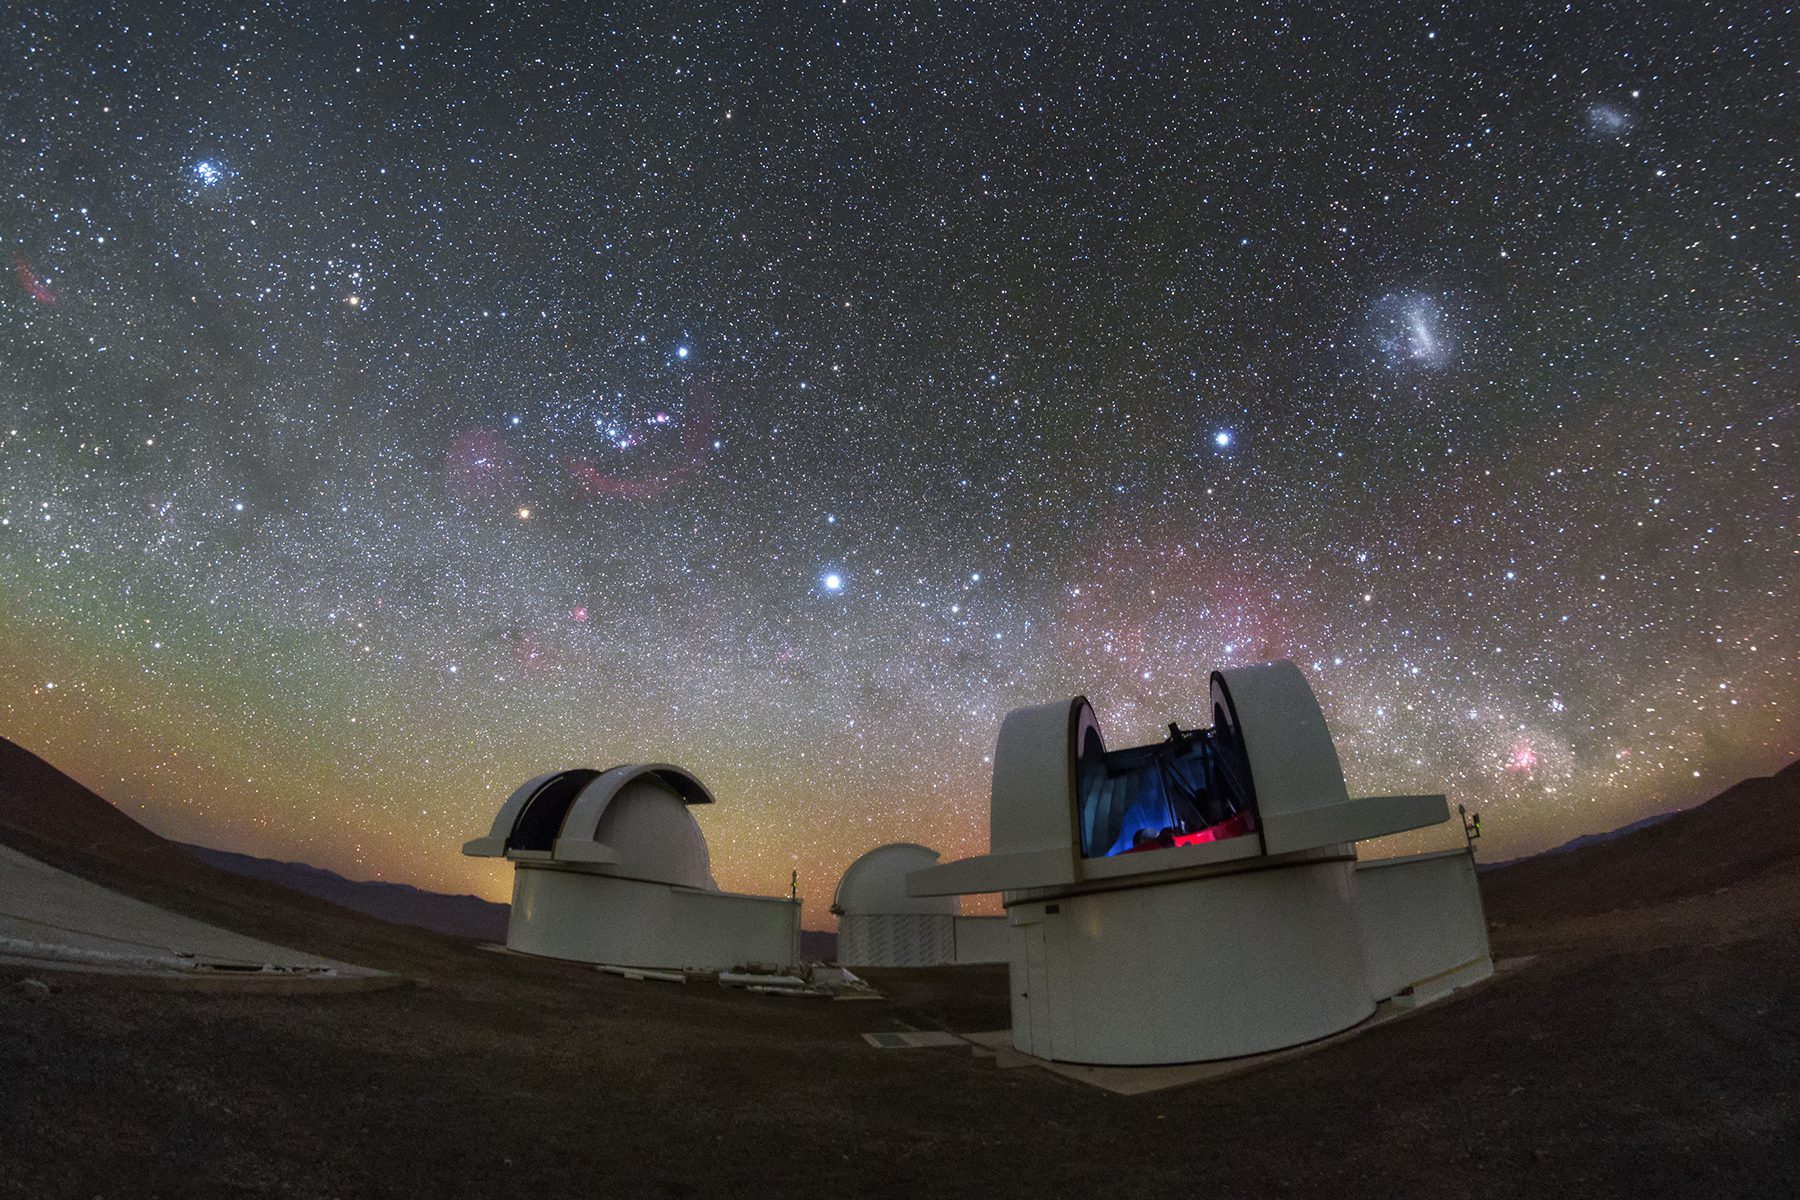 The telescopes of the SPECULOOS Southern Observatory look up at the breathtaking night sky above the Atacama Desert in Chile.